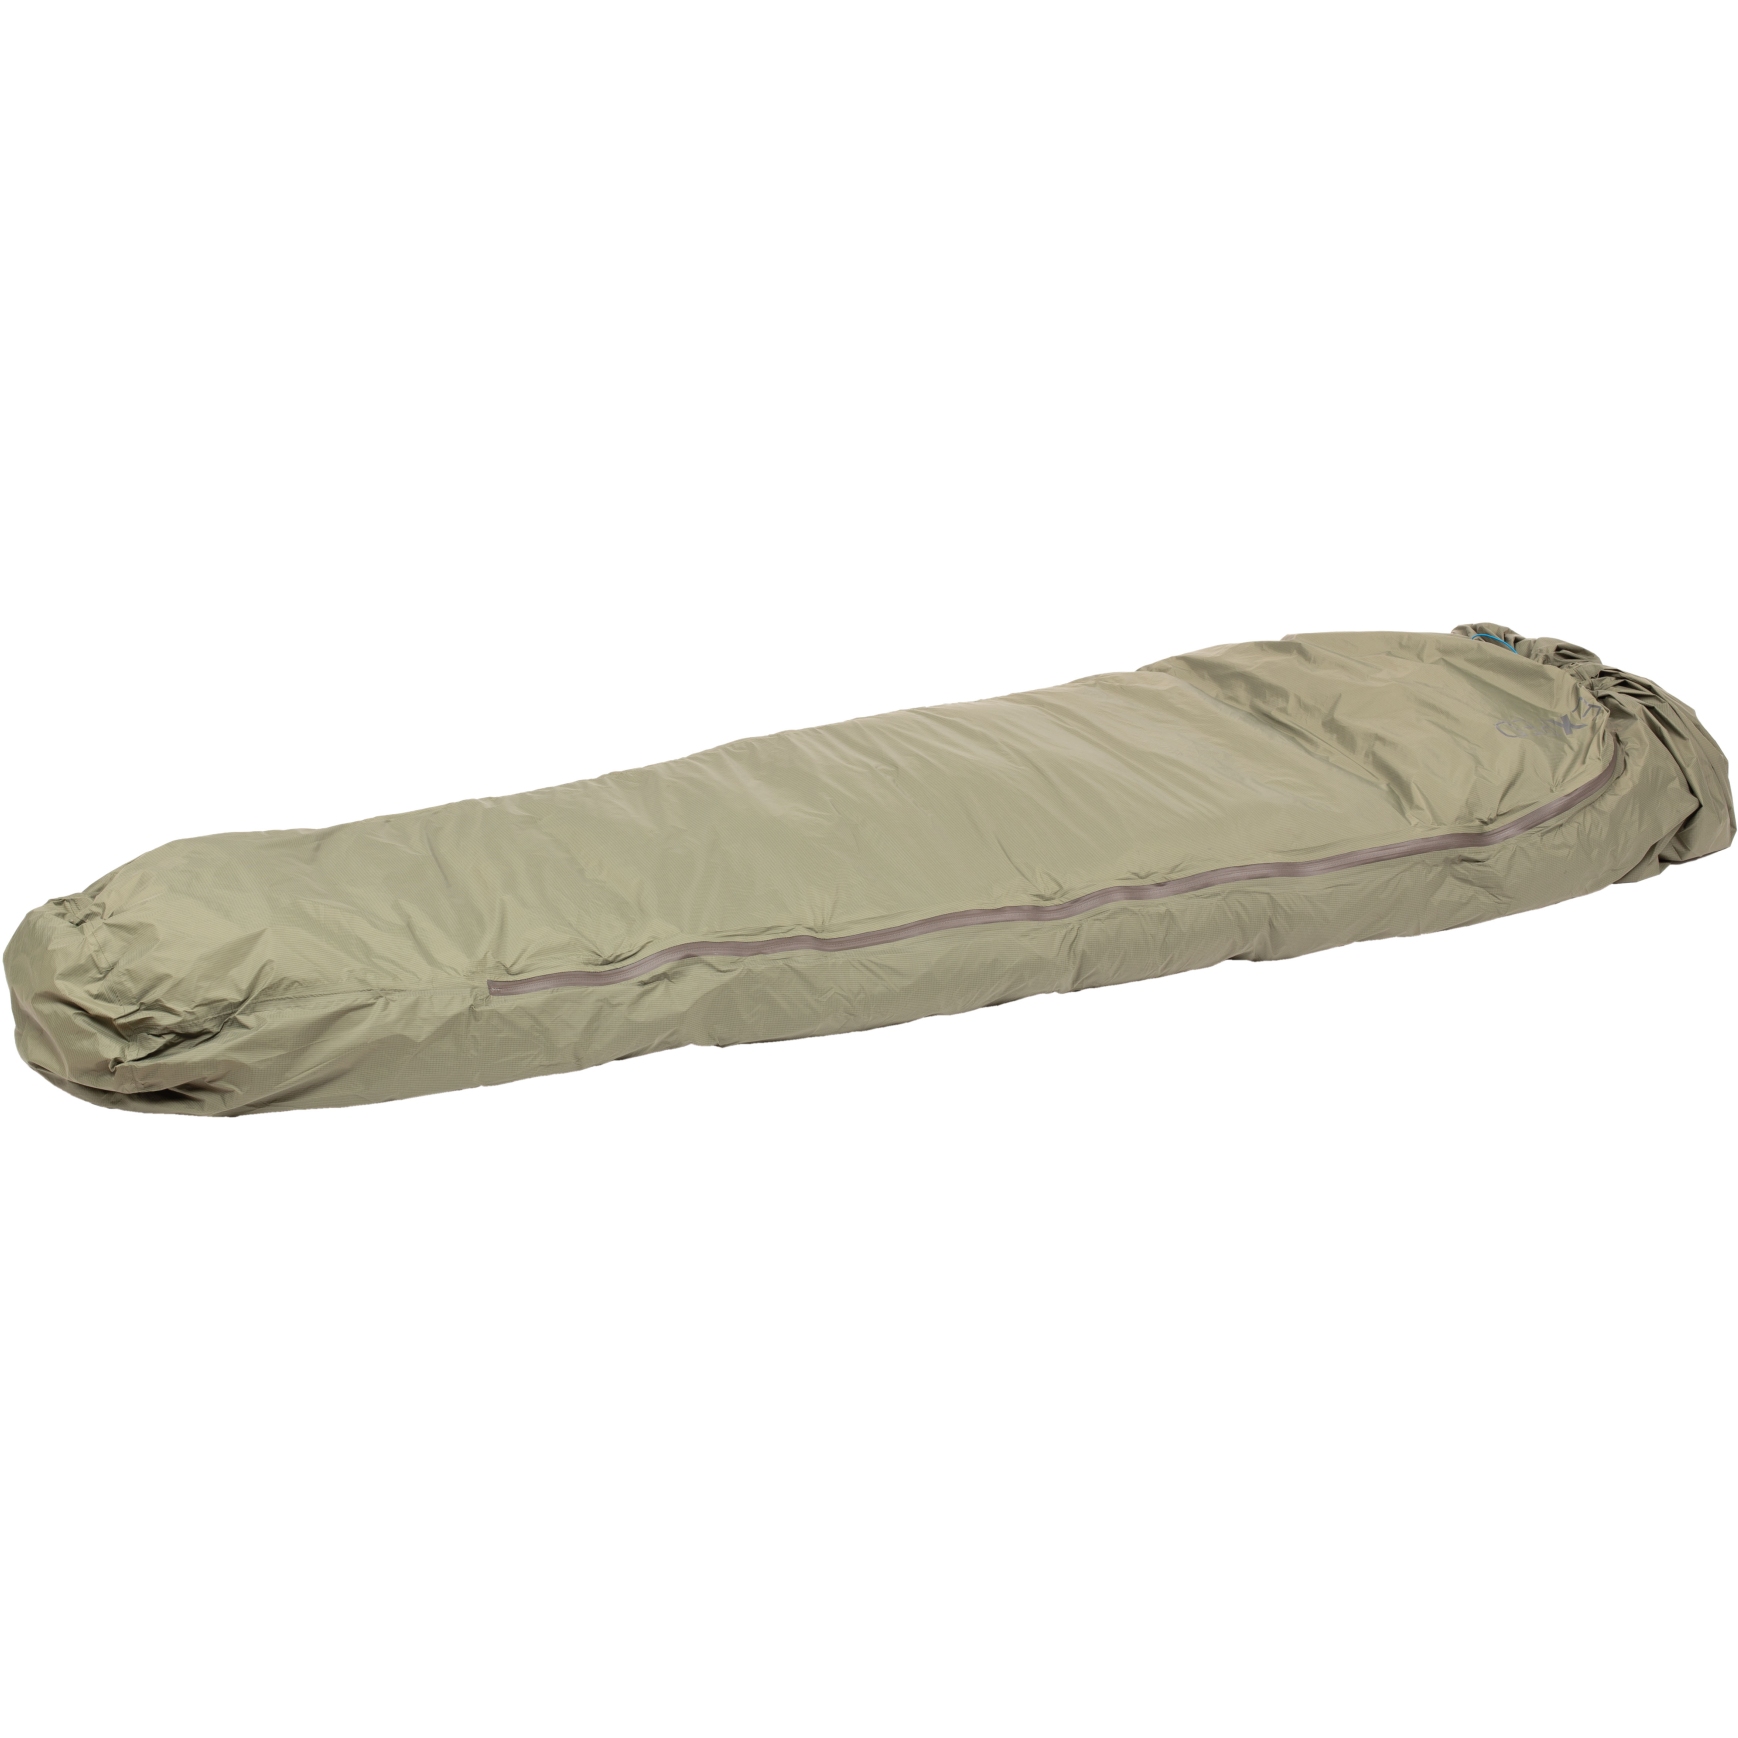 Picture of Exped Cover Pro Sleeping Bag Cover - M - olive grey/charcoal